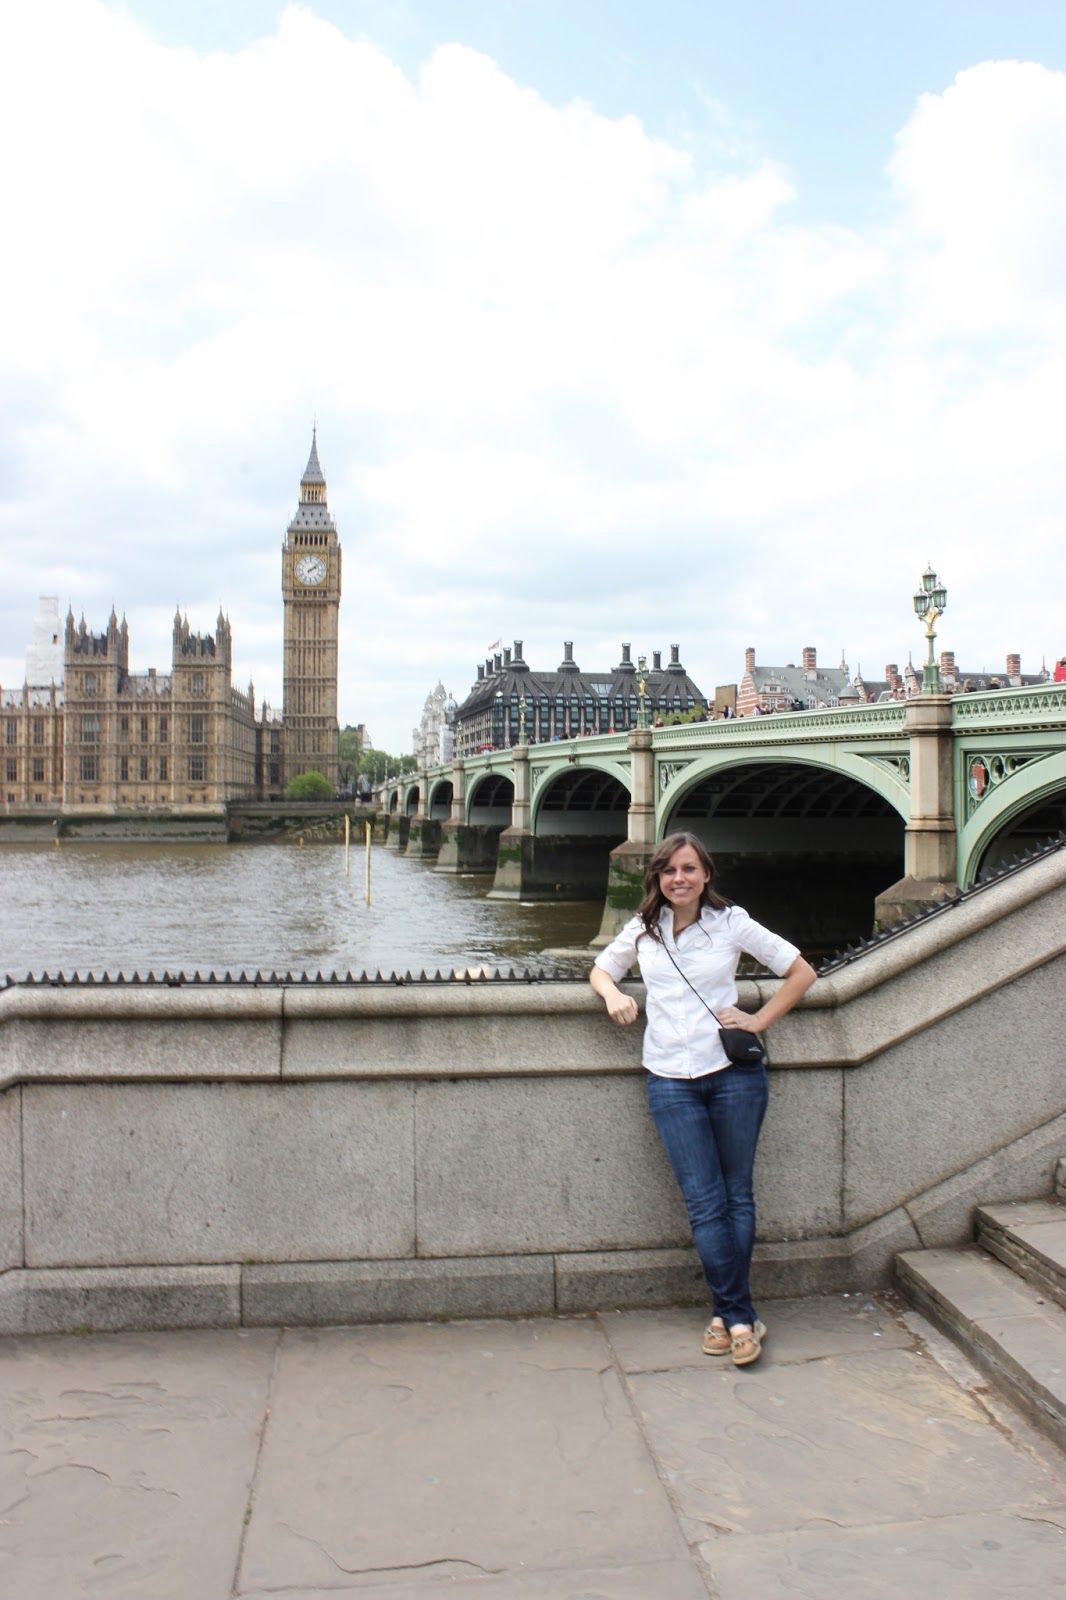 London Trip: Touring Big Ben and other scenic stops. 